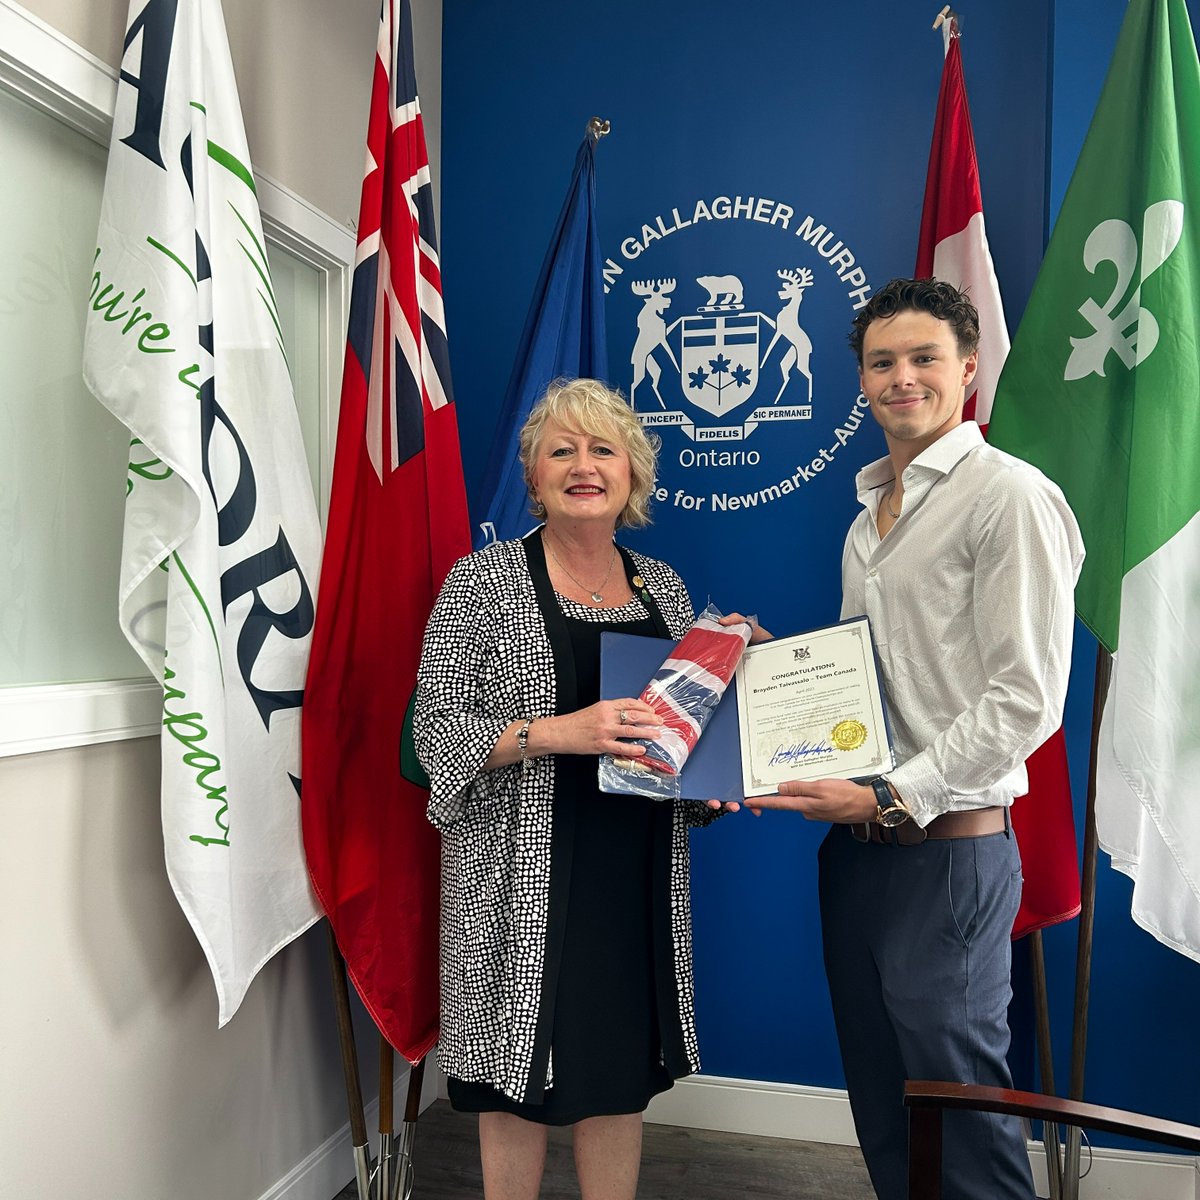 #Congratulations to #newmarket resident and swimmer @BraydenT04 who will be competing for @SwimmingCanada at the World Championships in Japan. I had the opportunity to meet Brayden and his family at my office to present a congratulatory scroll and learn about his swimming goals.